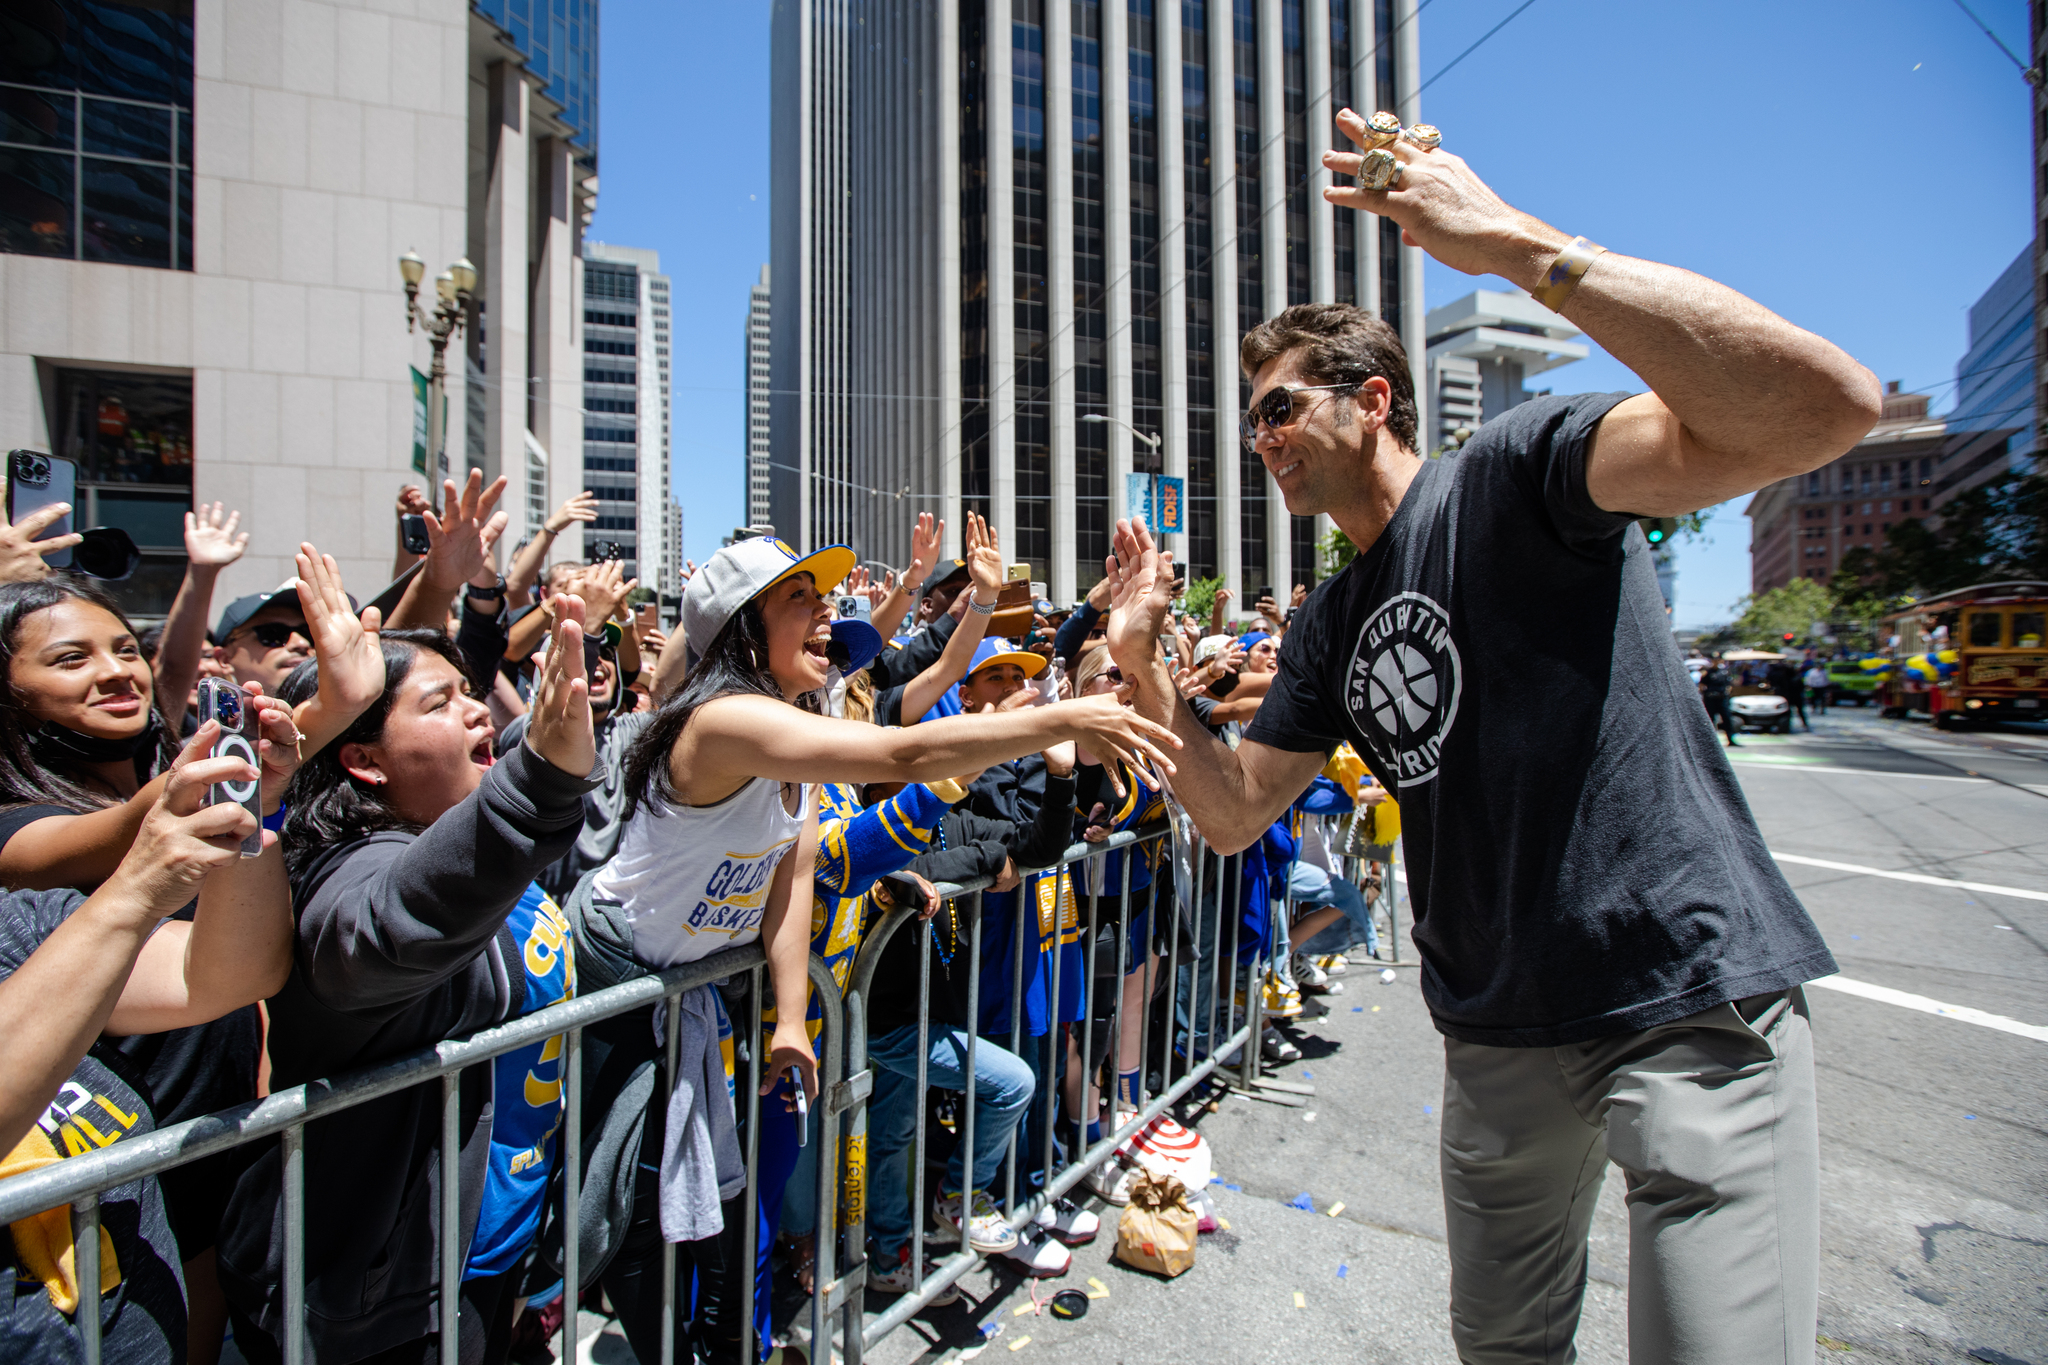 The best photos from the Warriors championship parade in San Francisco